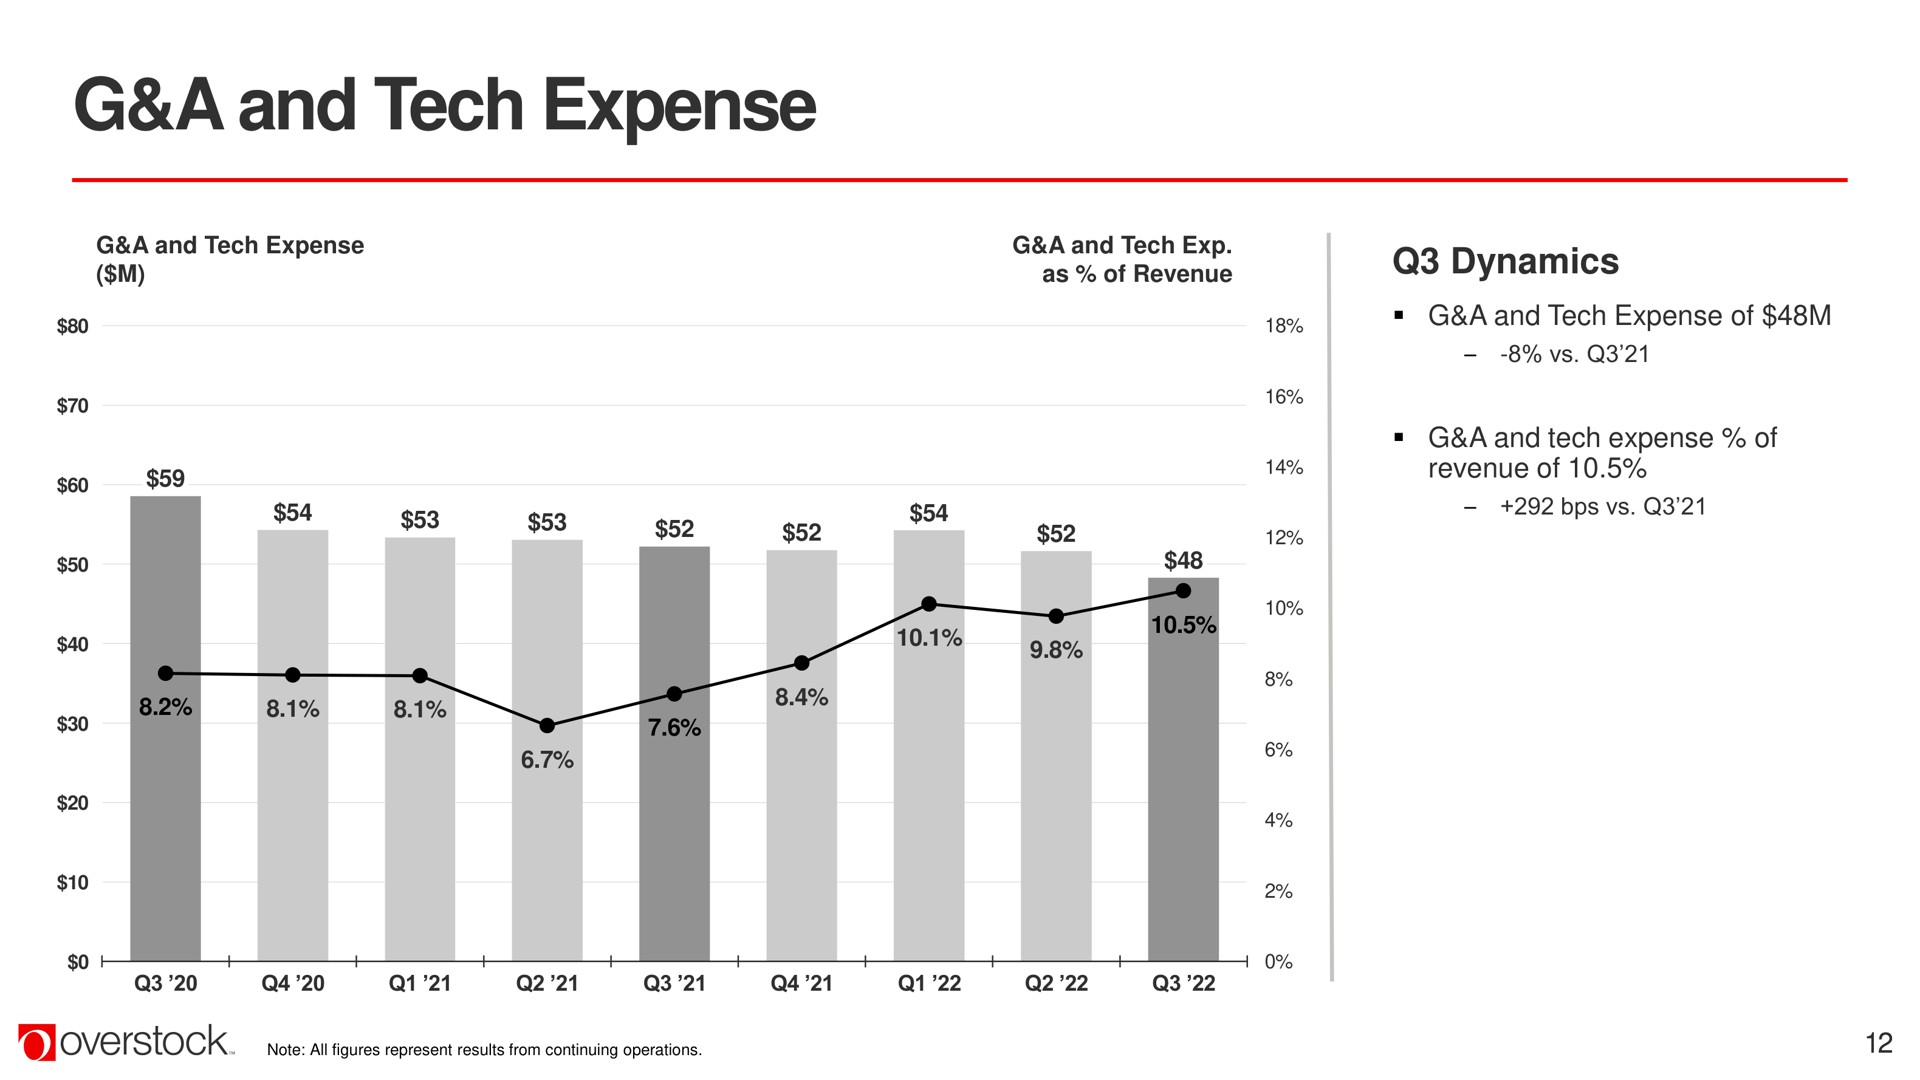 a and tech expense | Overstock